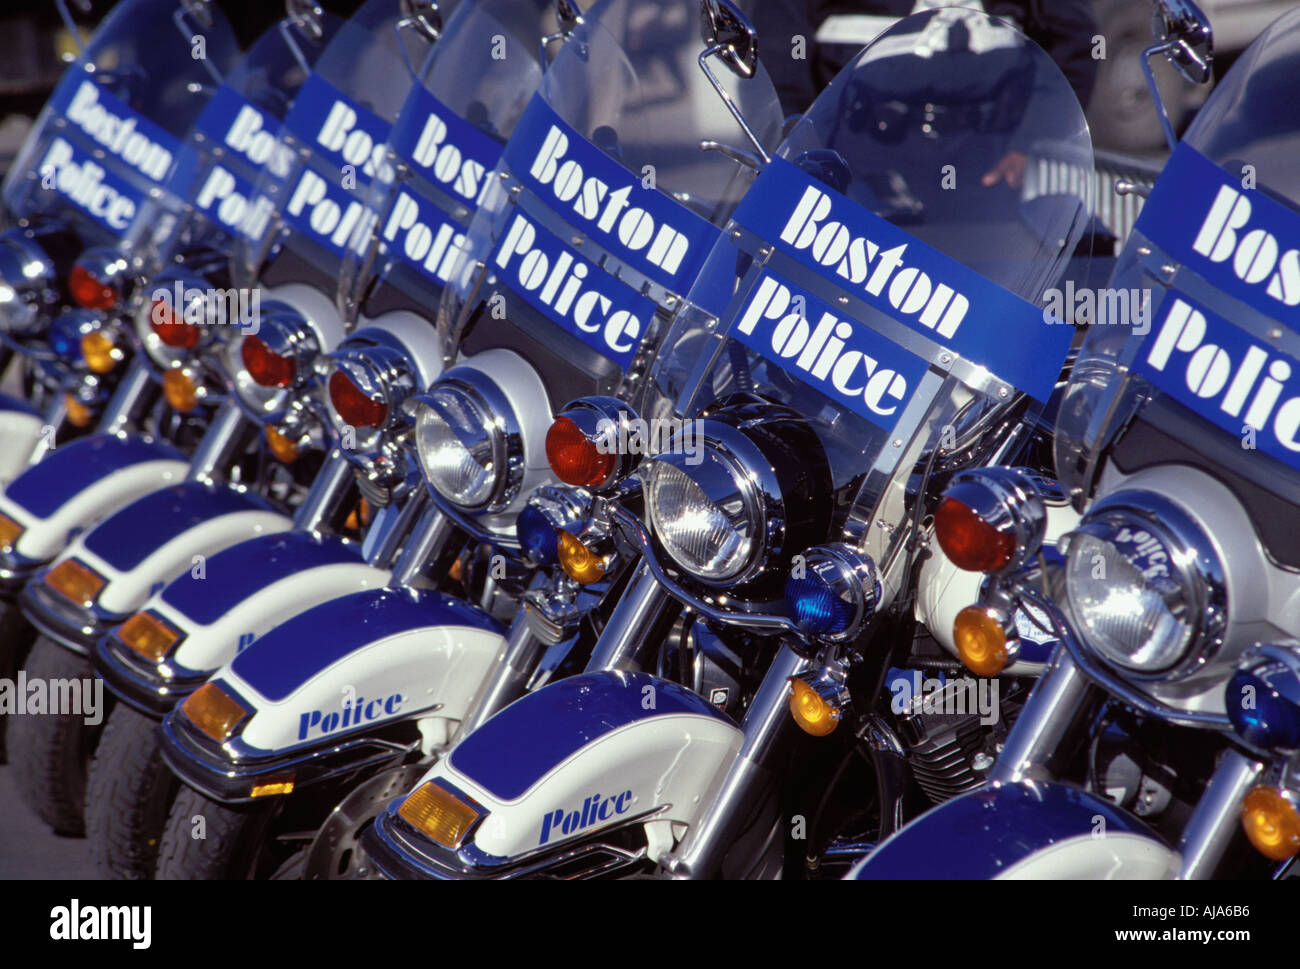 A row of Boston Police motorcycles during the Saint Patricks Day Parade in Southie South Boston Stock Photo